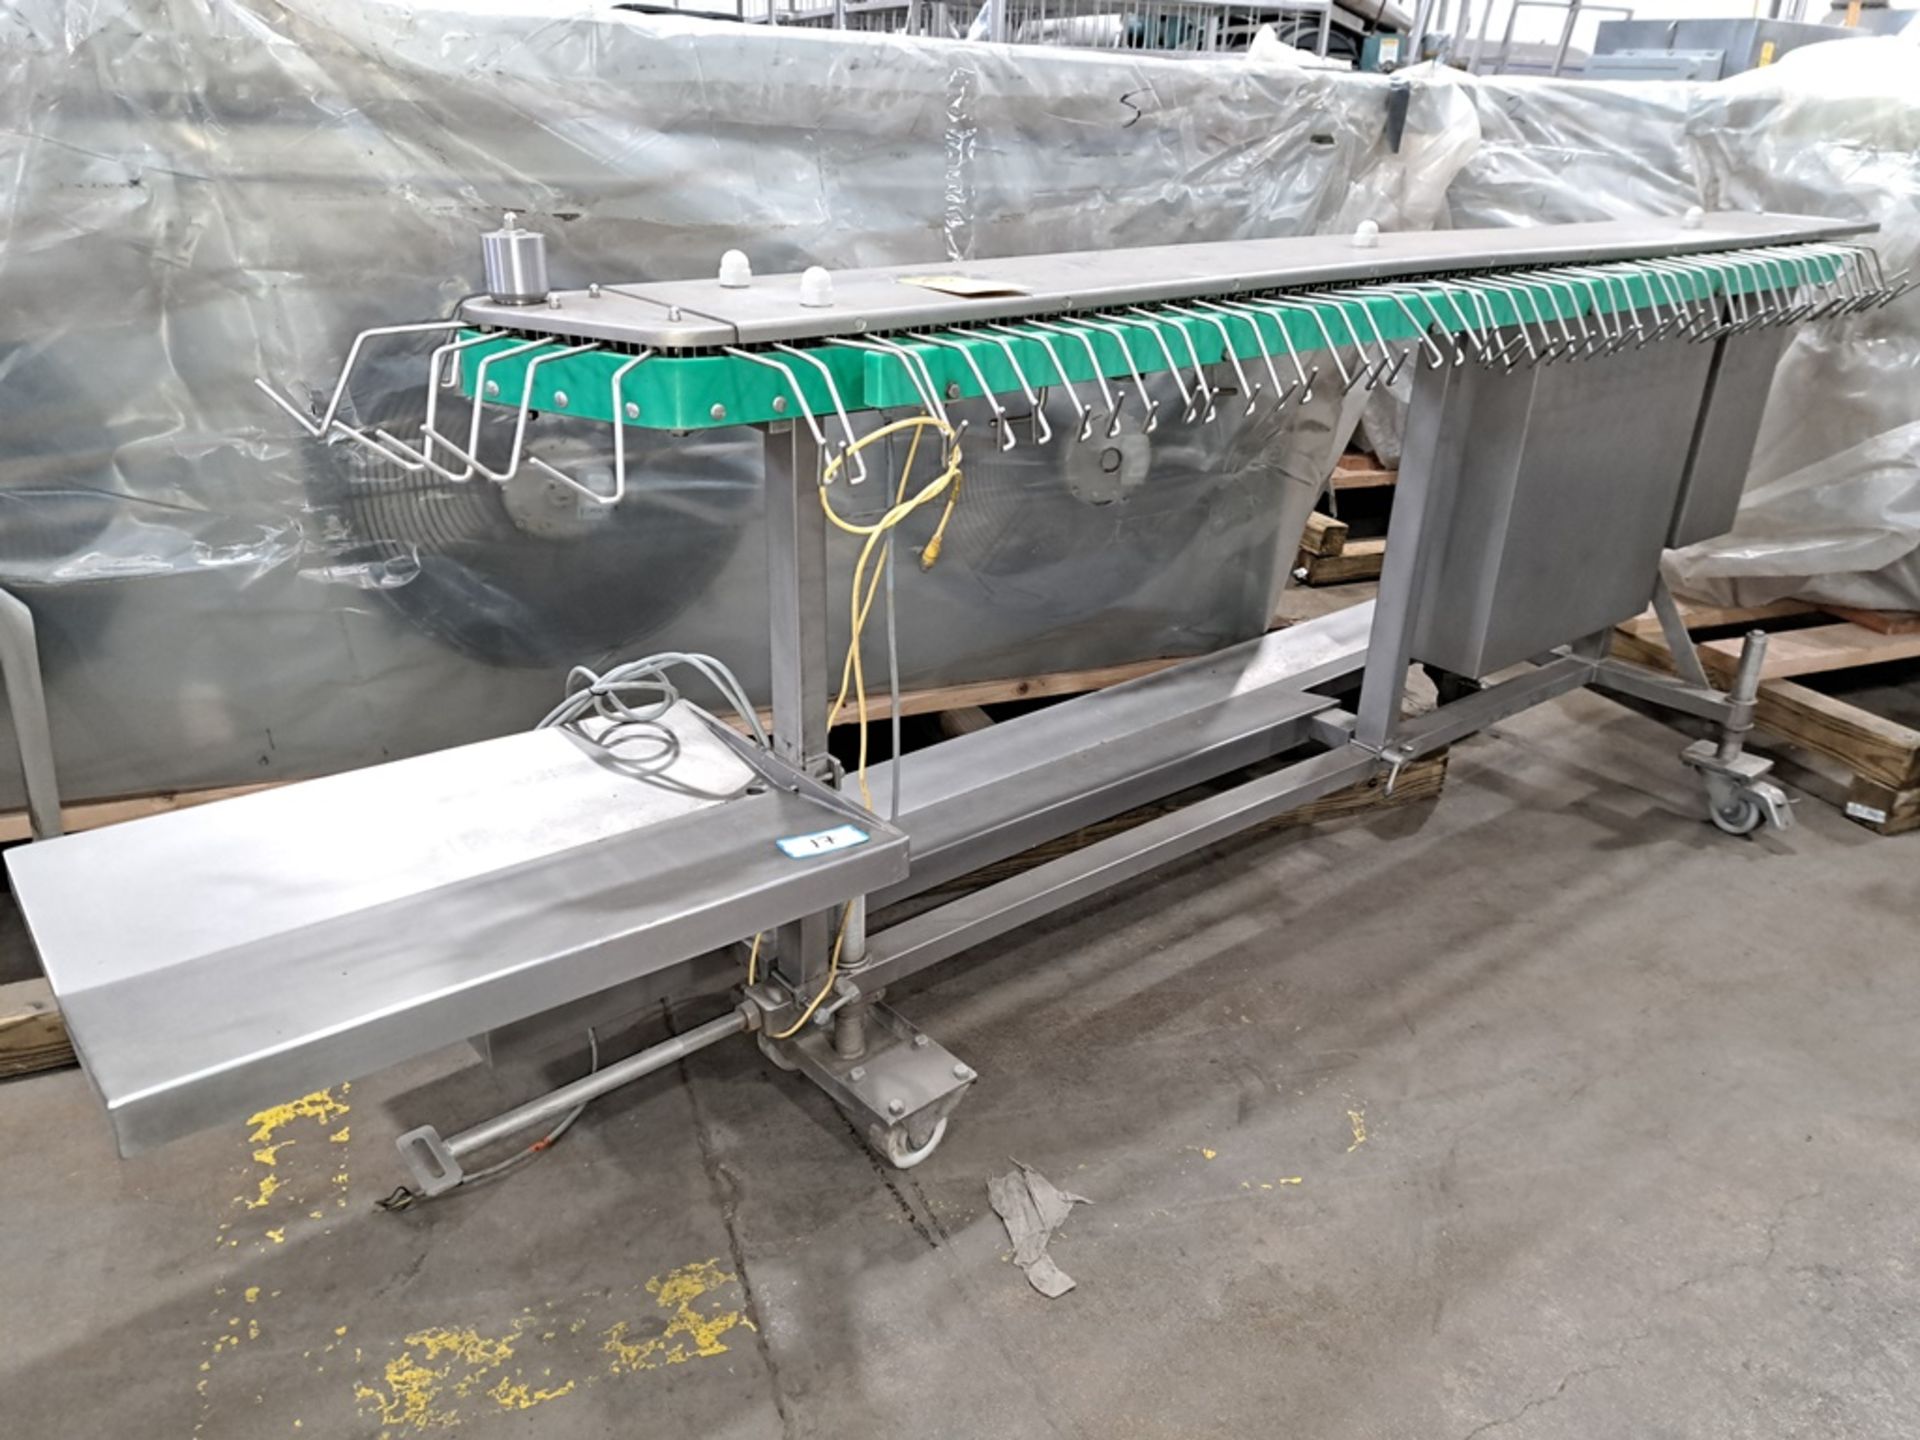 Vemag Mdl. AHM204 Sausage Link Hanger, 220-460 volts, 3 phase, Ser. #2040041 (Located in Plano, IL)